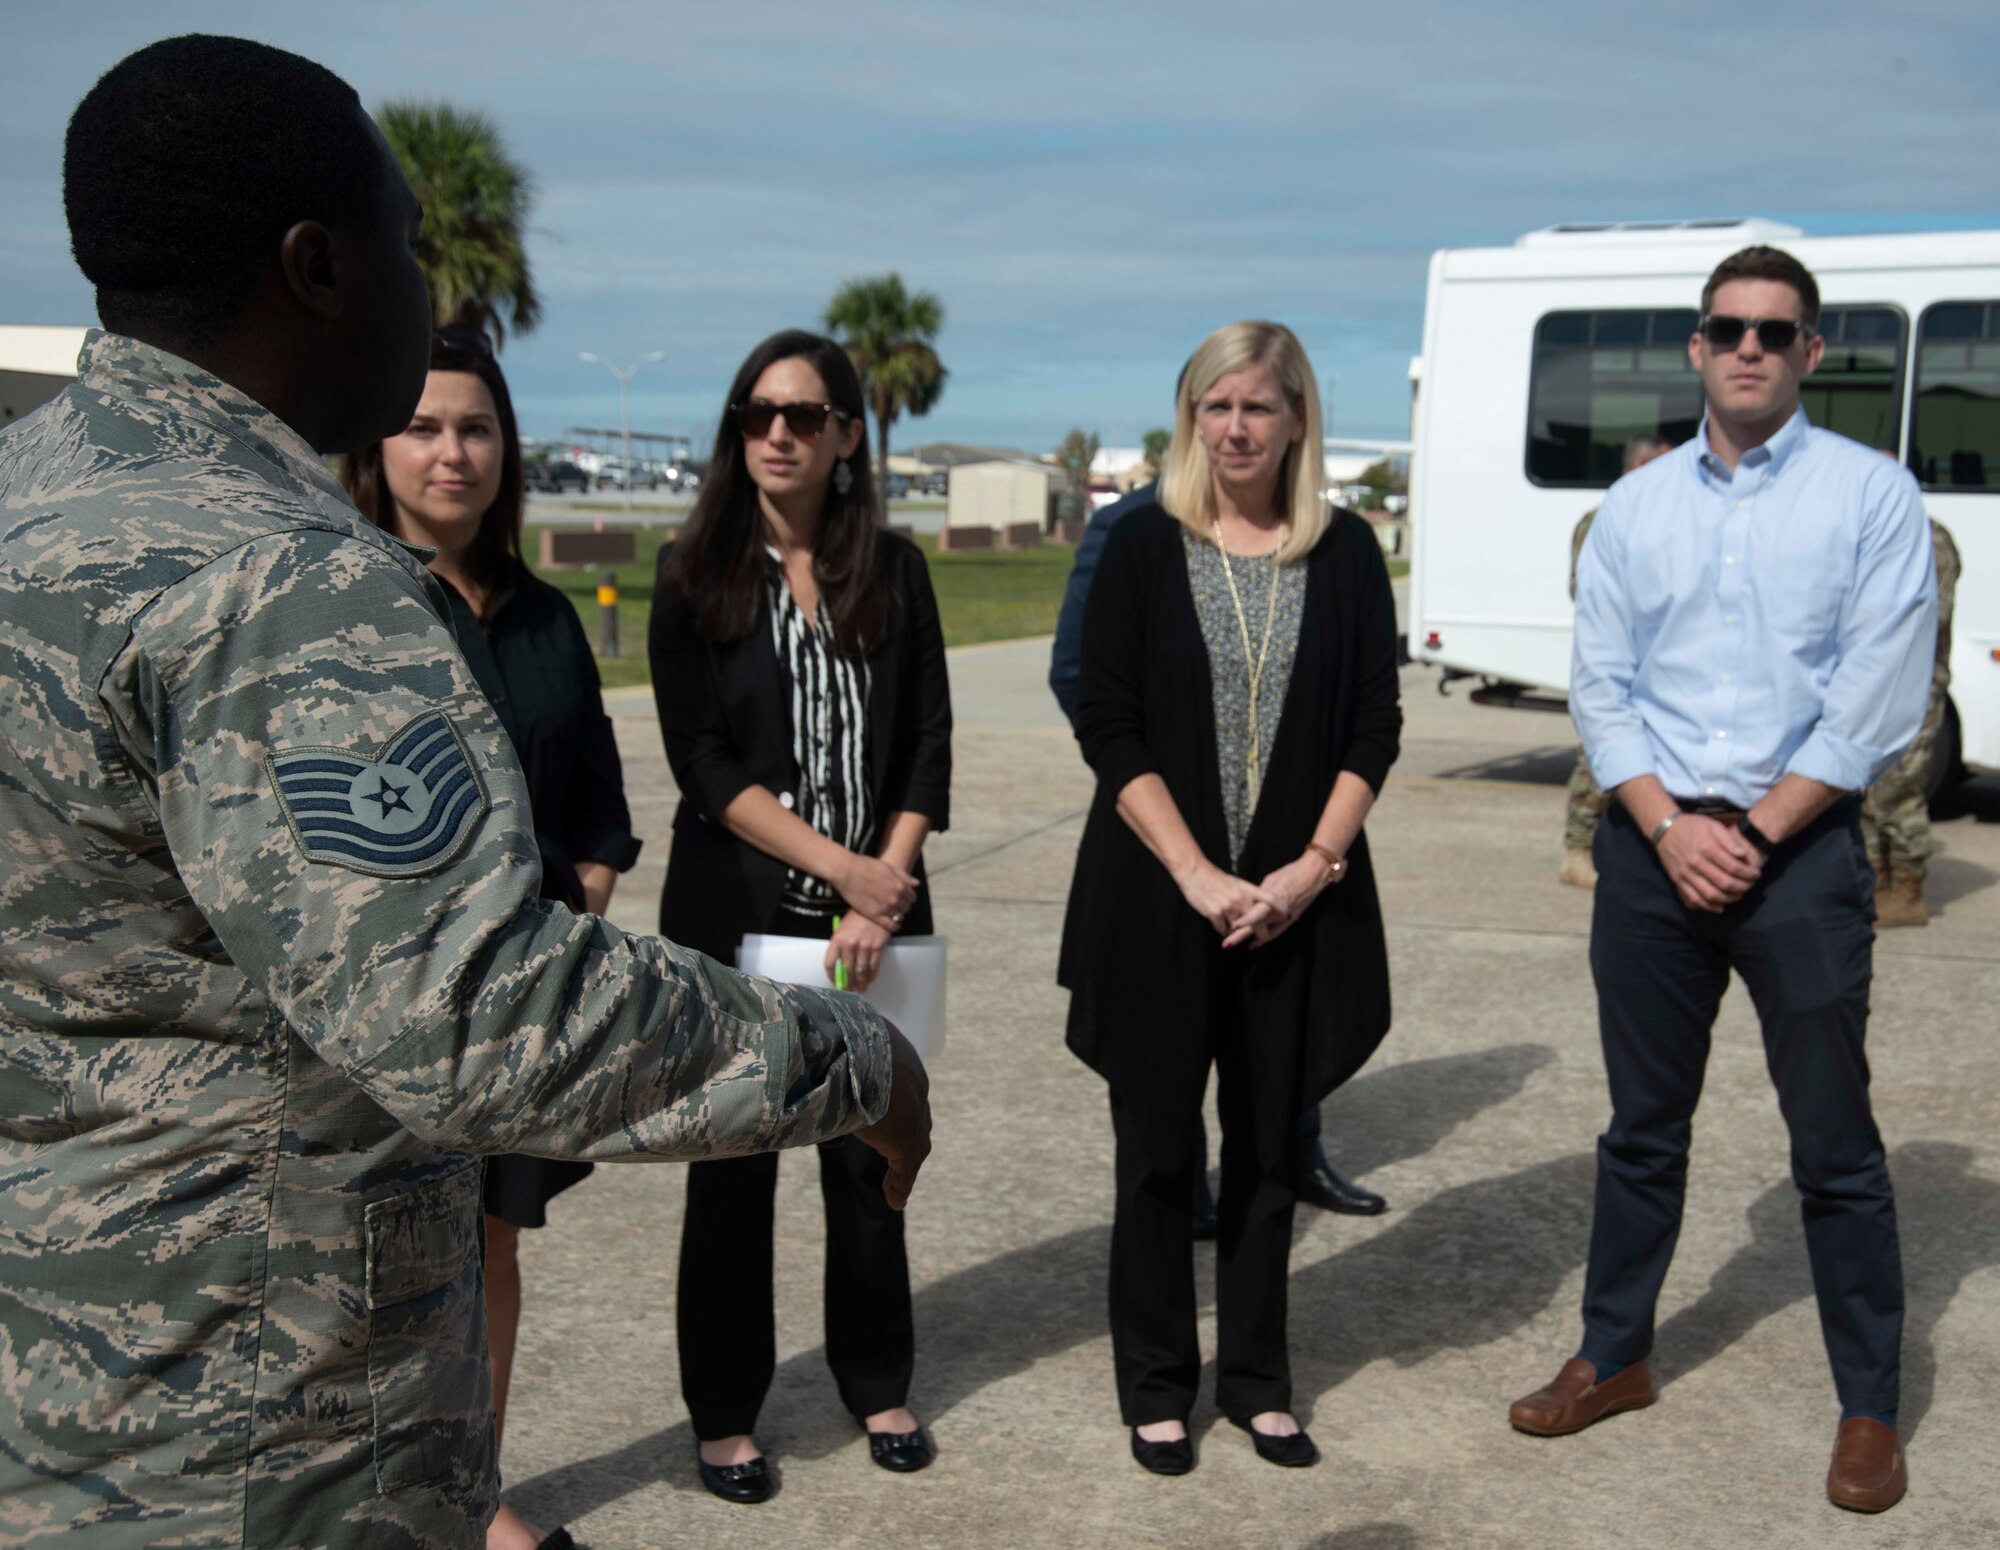 Tech. Sgt. Donte Slocum, 325th Maintenance Squadron F-22 Hangar 4 technician, briefs several members of the Senate Appropriations Committee on Oct. 28, 2019, at Tyndall Air Force Base, Florida. The attendees viewed an aircraft undergoing maintenance and saw one of the few structures to survive Hurricane Michael which devastated the base in 2018. Other than losing its roof, the hangar was completely untouched on the inside, saving the harbored aircraft during the storm. (U.S. Air Force photo by Staff Sgt. Magen M. Reeves)